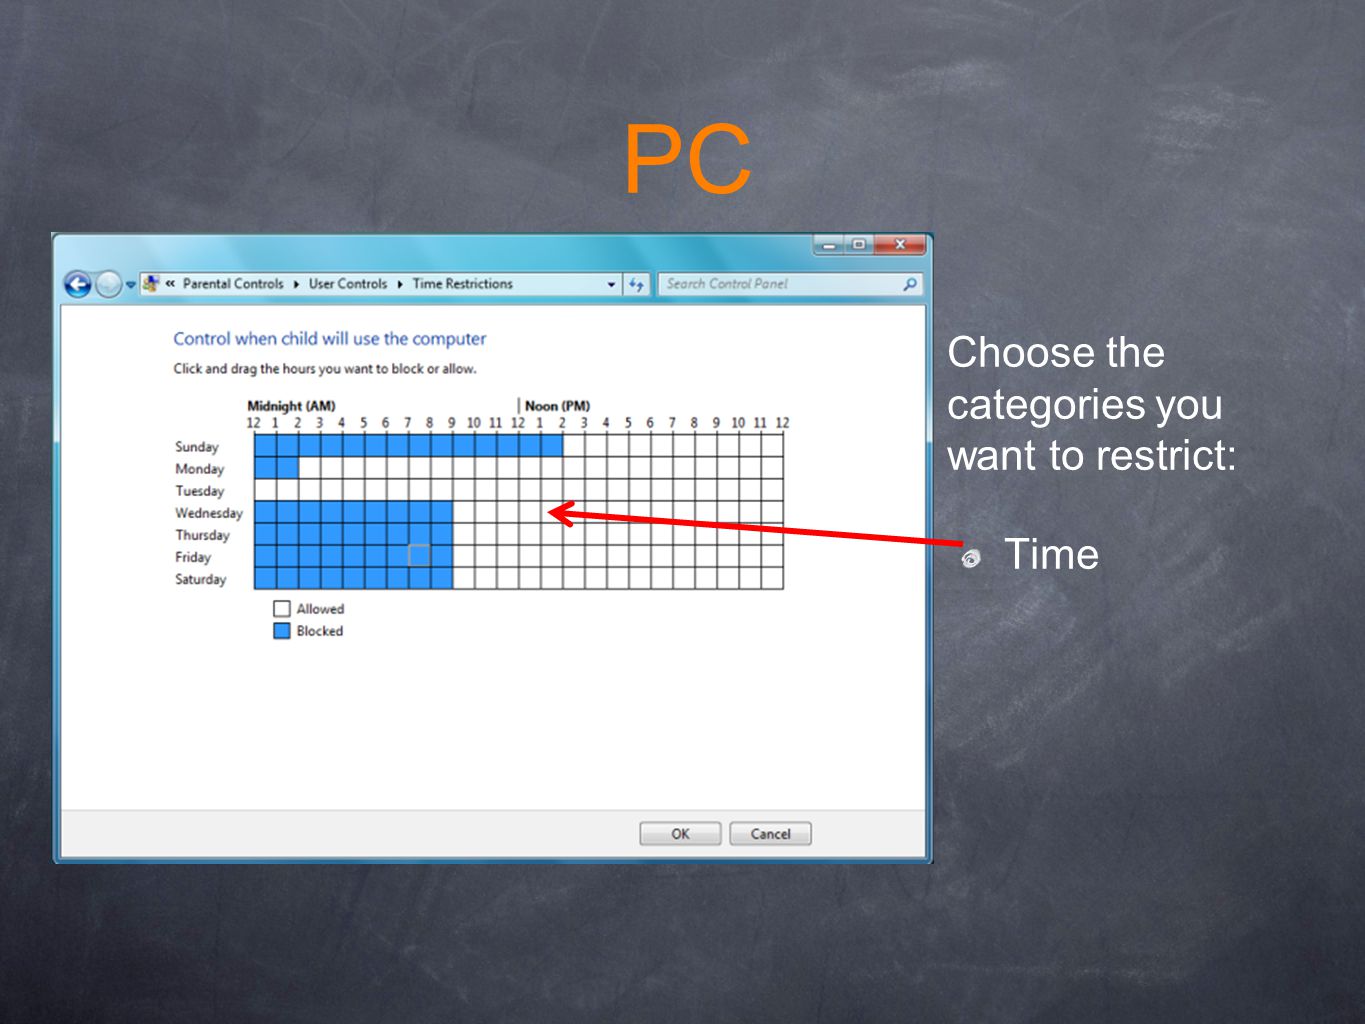 PC Choose the categories you want to restrict: Time